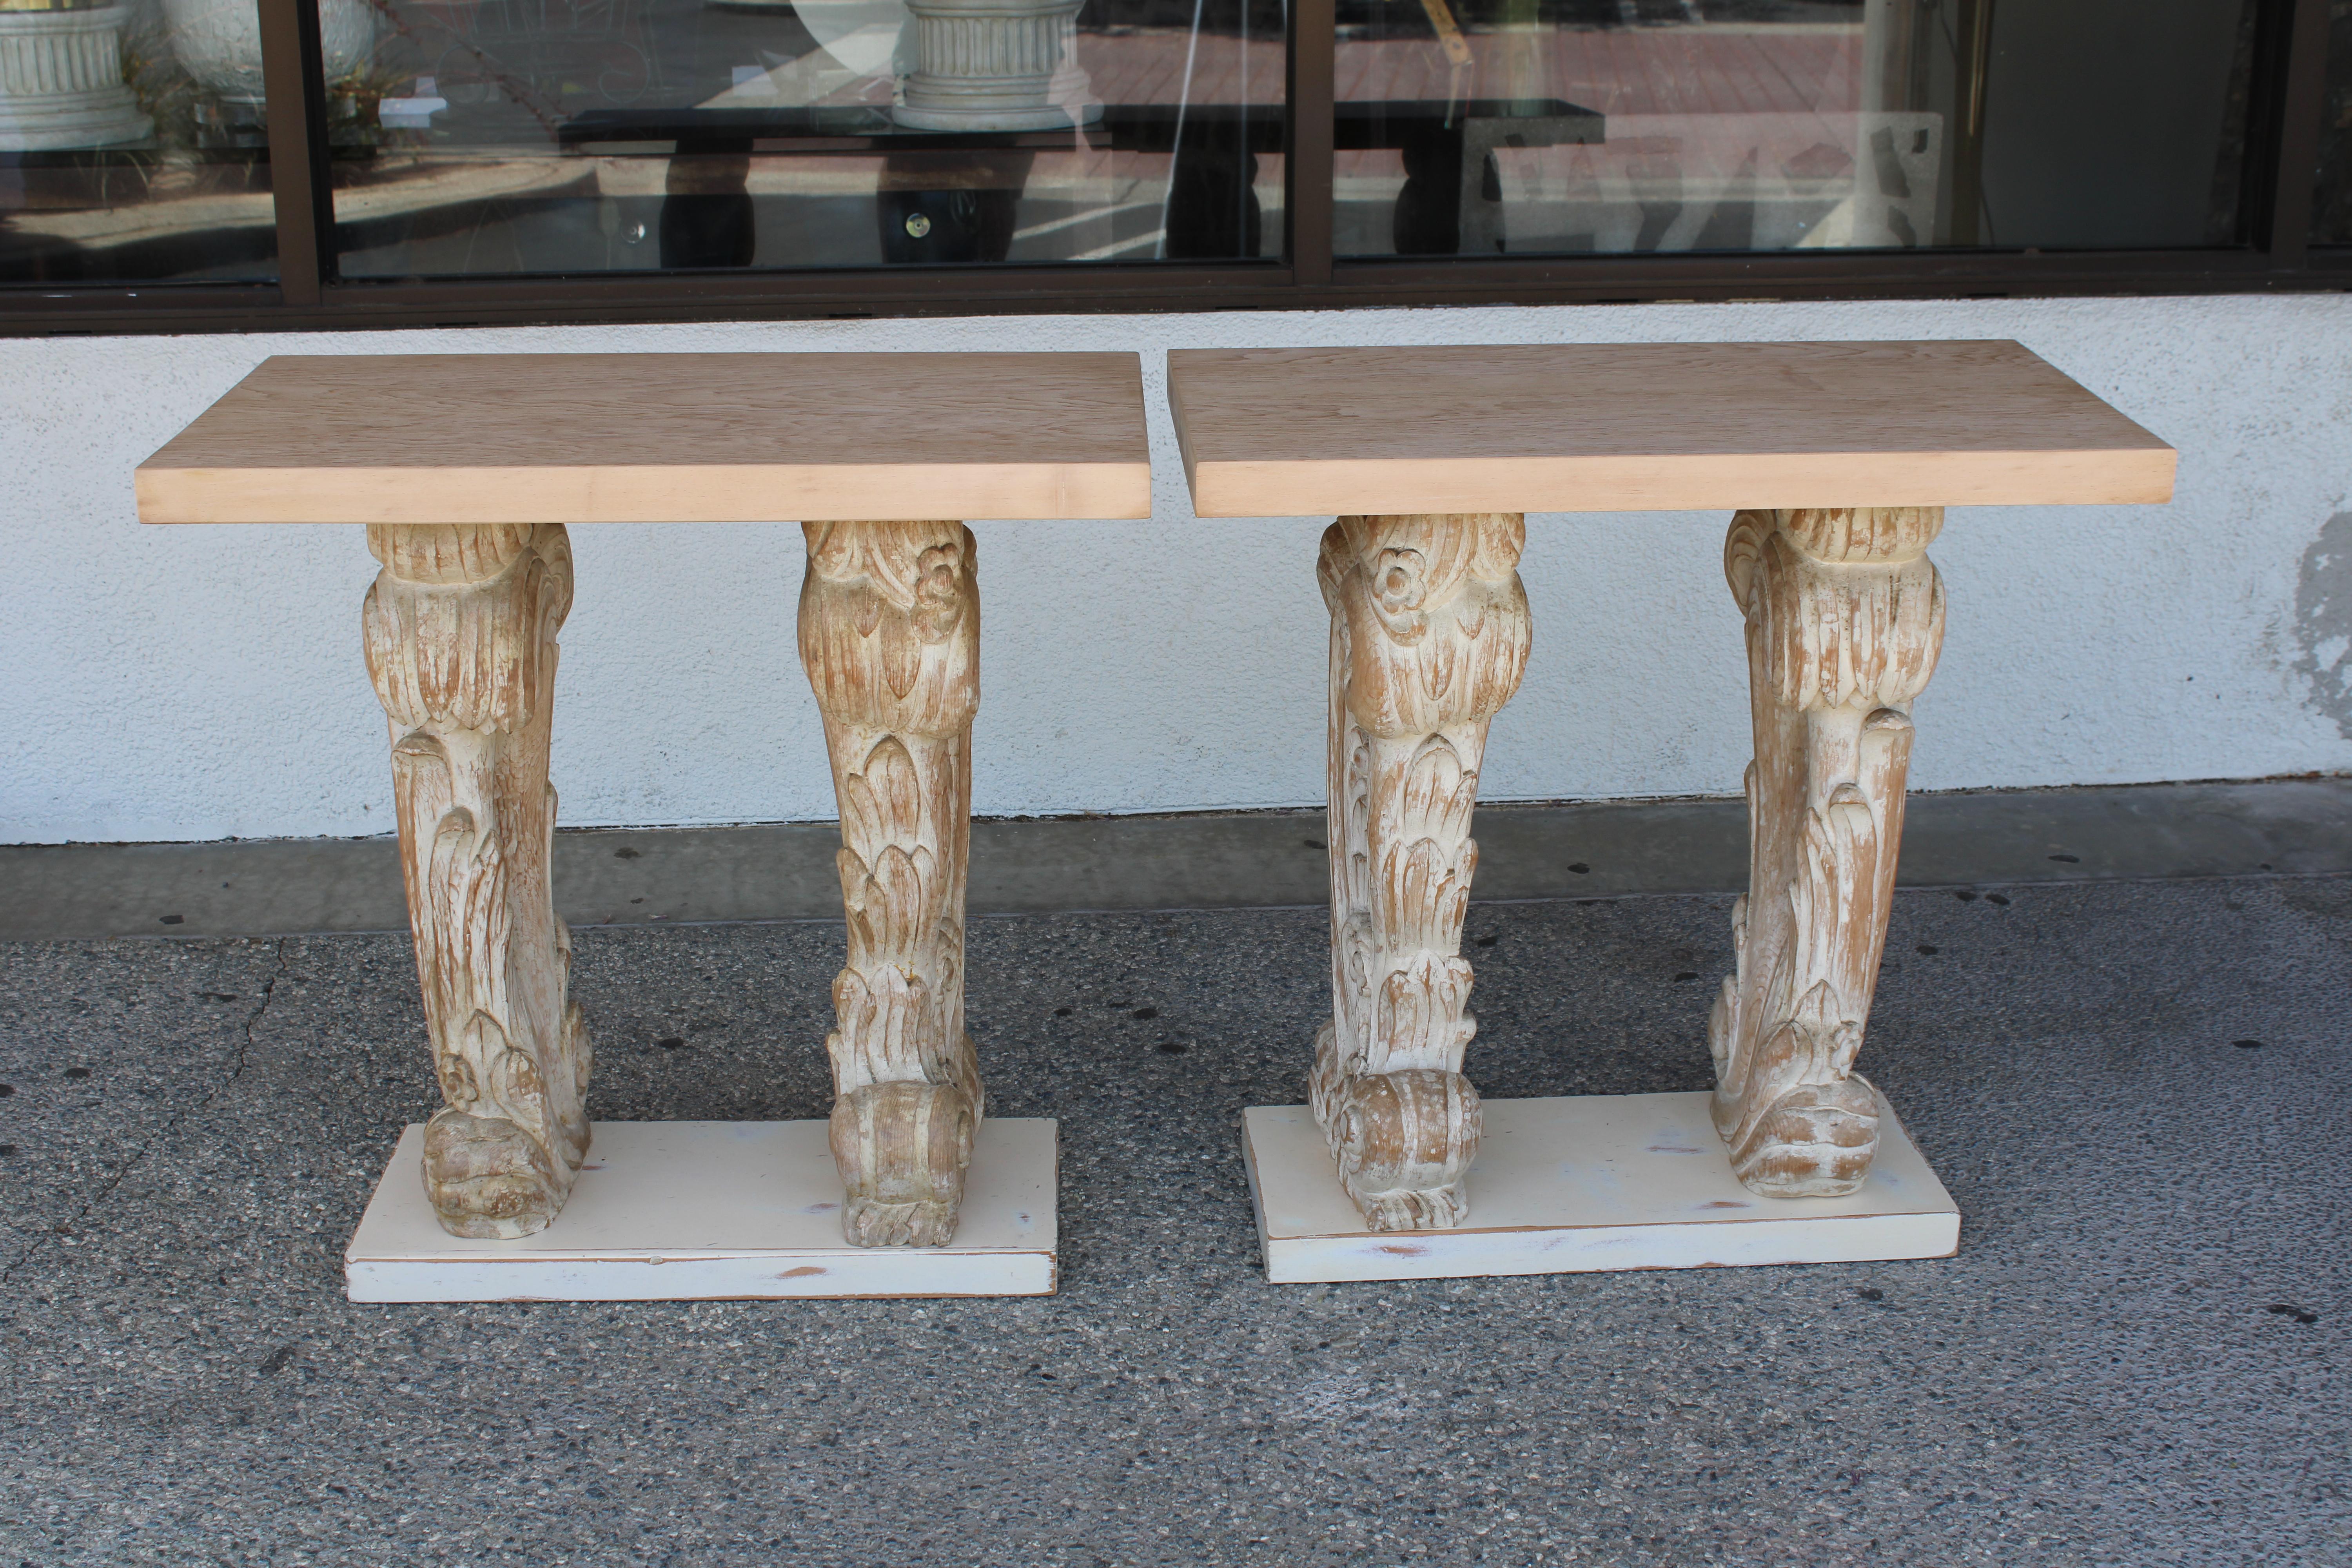 Pair of carved painted console tables. The finish is painted in soft cream muted colors. There is fine carving throughout depicting flowers and acanthus leaves. We had the painted tops professionally stripped and refinished. Each console measures